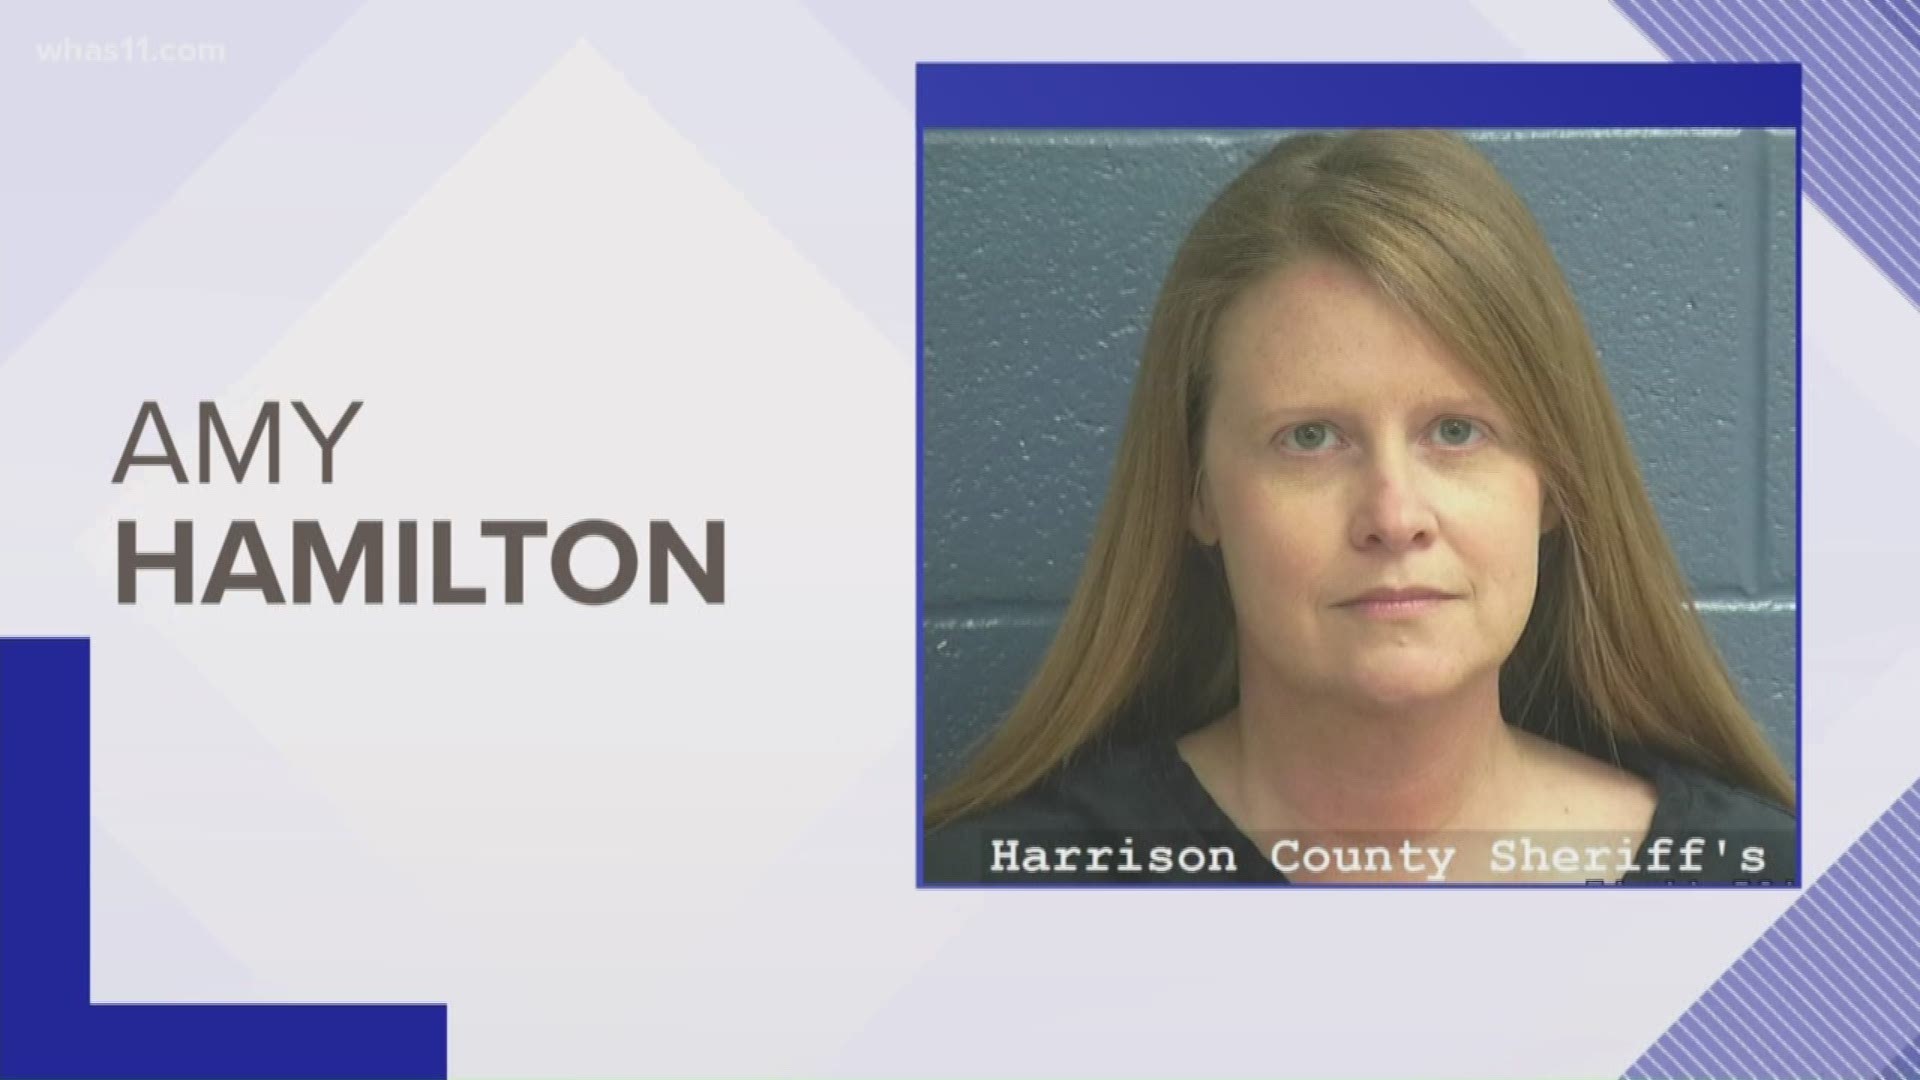 An Indiana teacher is facing charges after allegedly having sex with a 15-year-old former student.